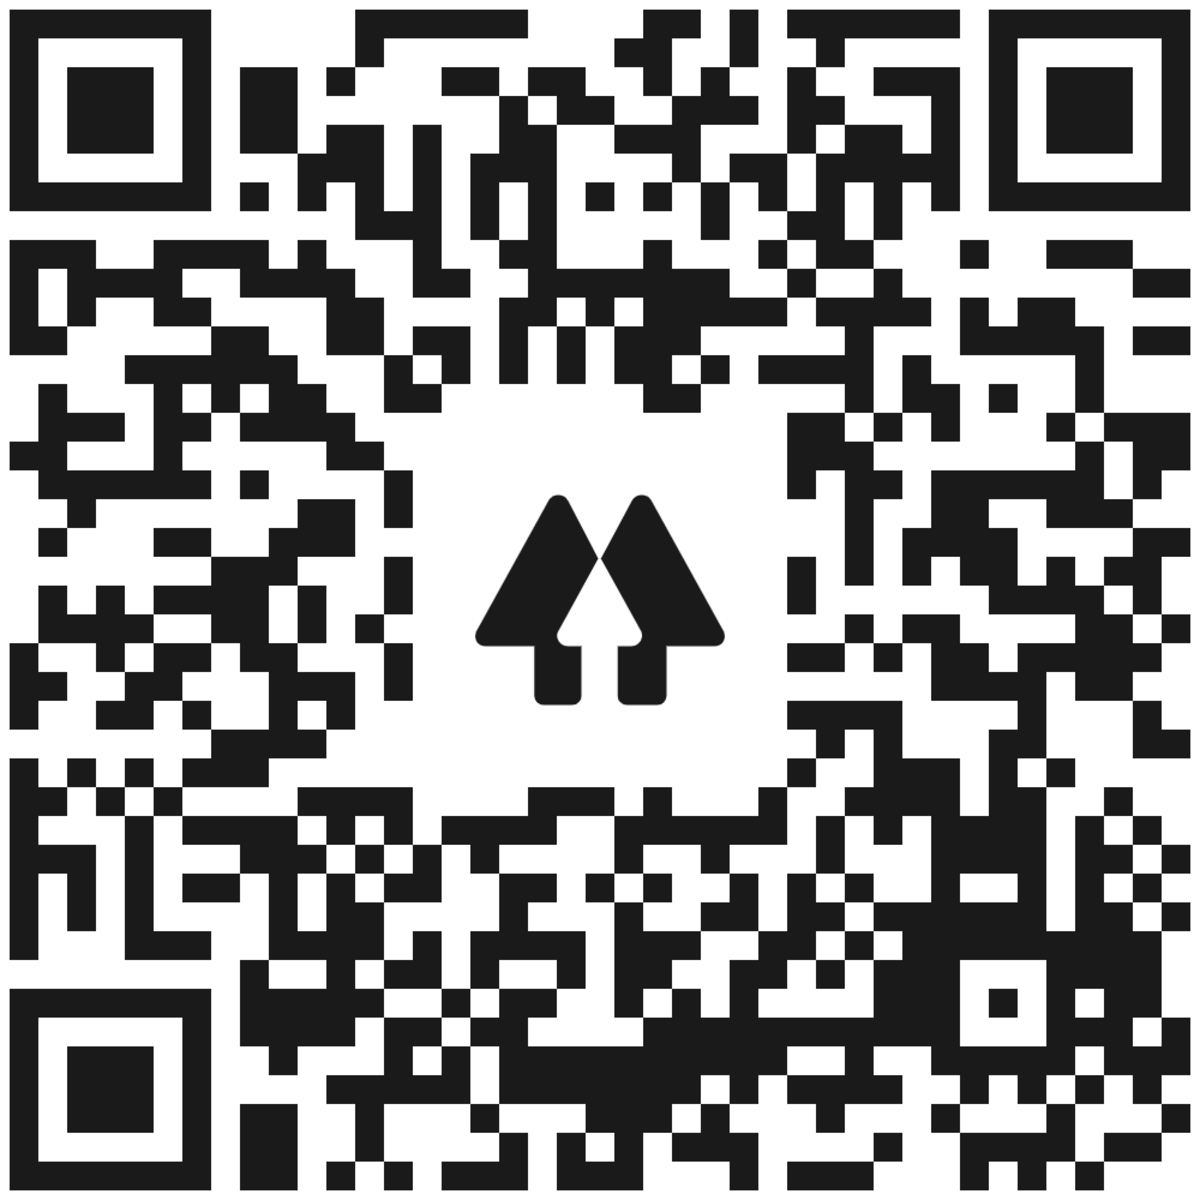 Subscribe to the podcast by scanning this QR code.